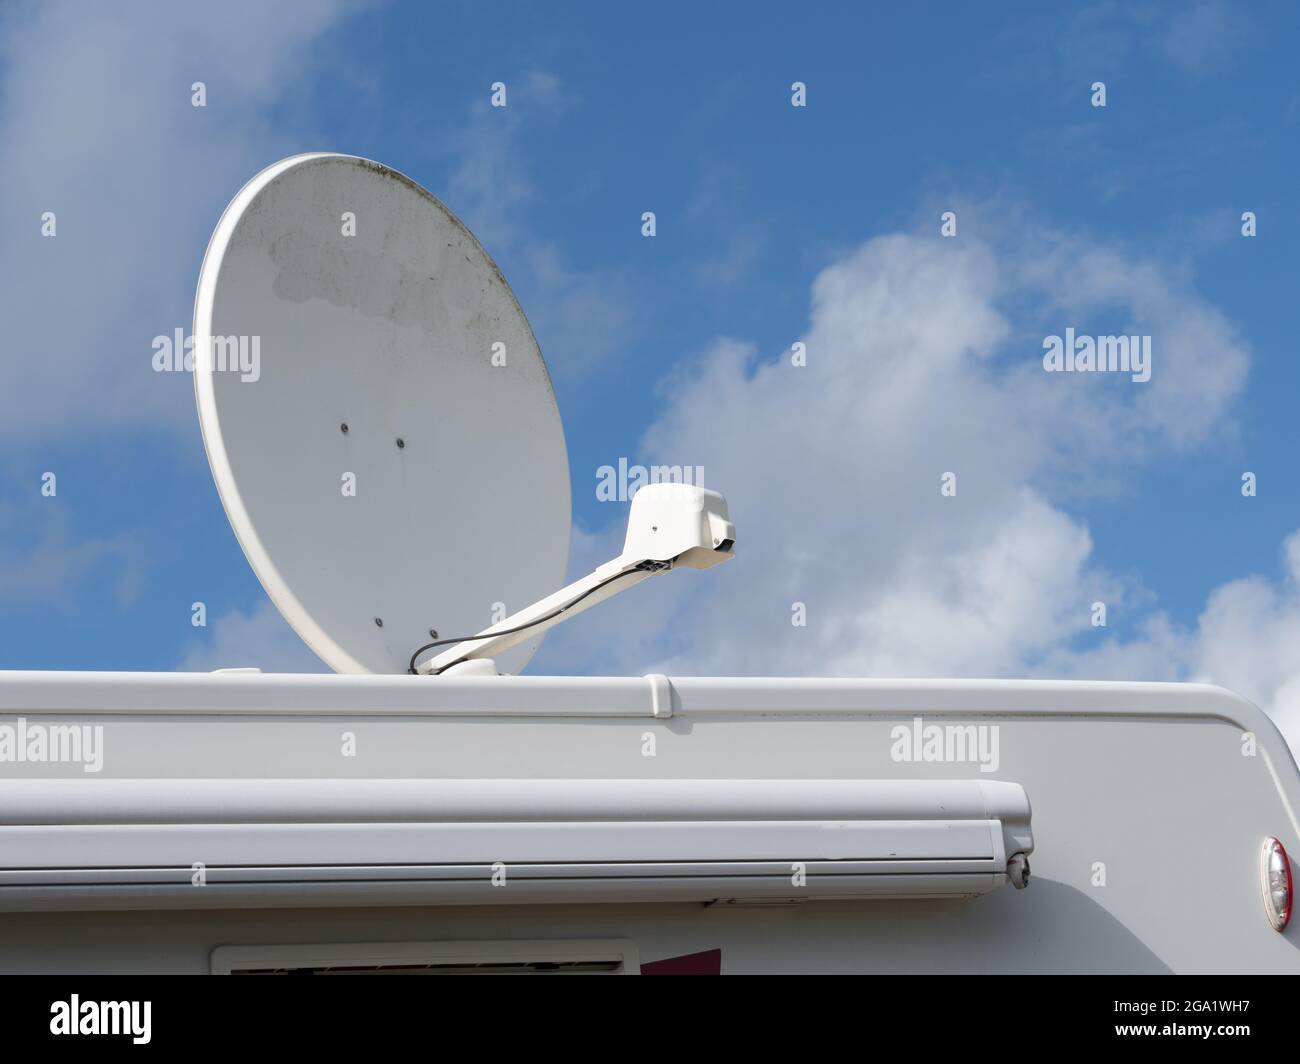 A large roof top satellite dish on top of a motorhome recreational vehicle against a blue sunny sky Stock Photo